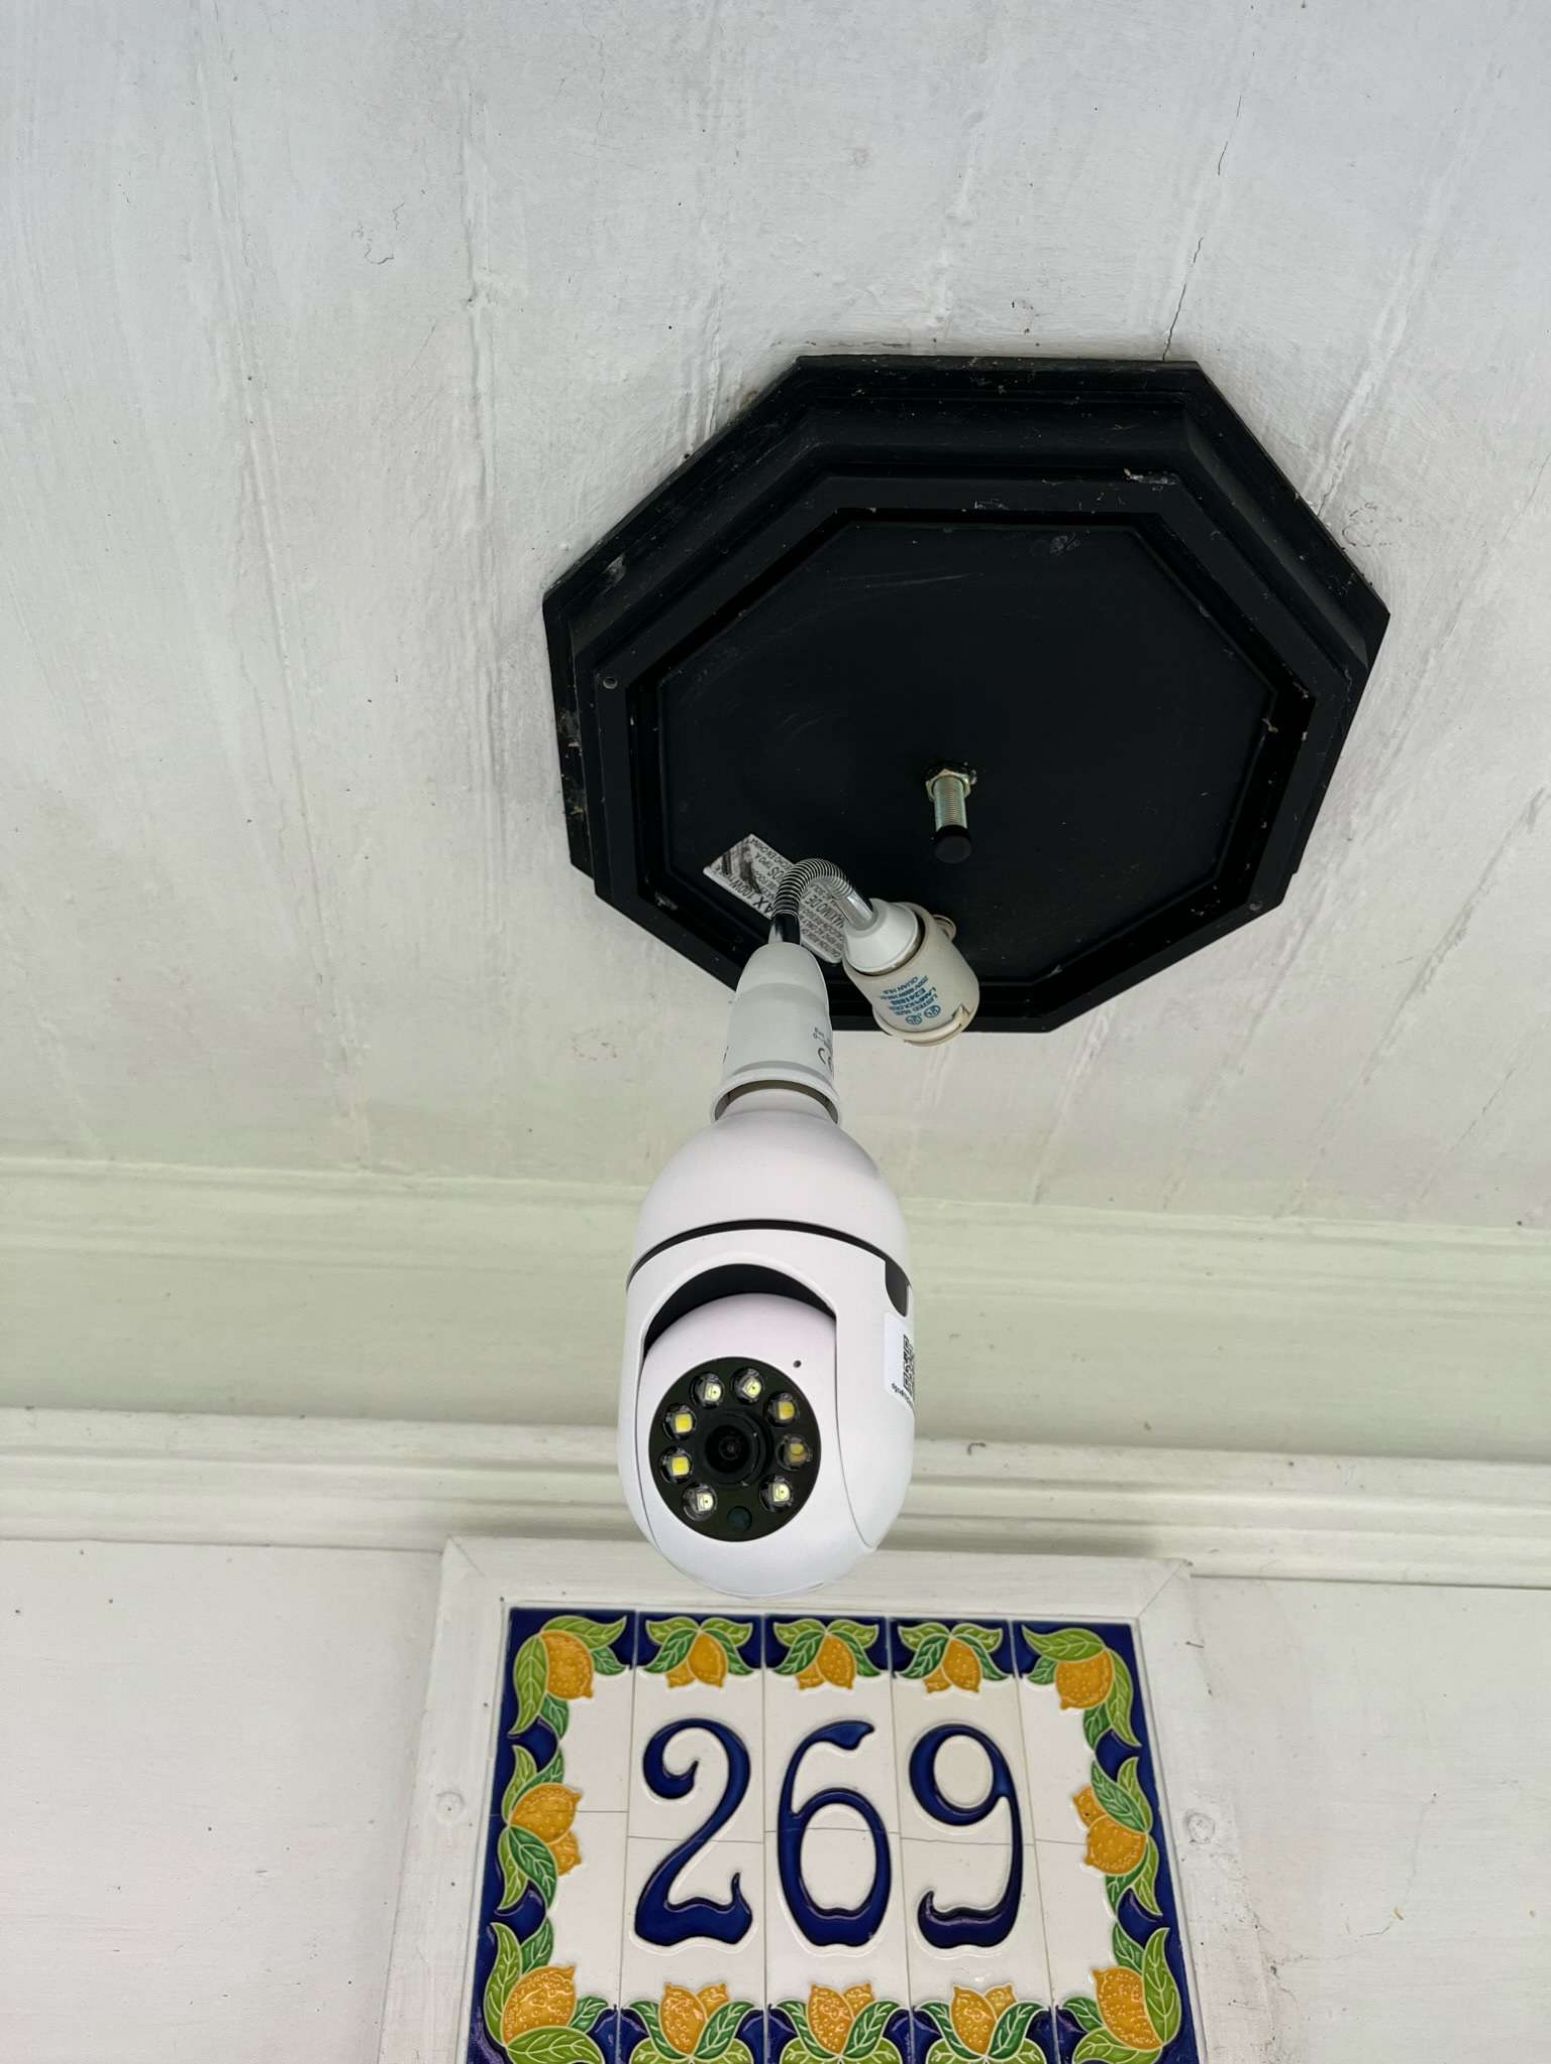 Nomad Security Camera Product Review